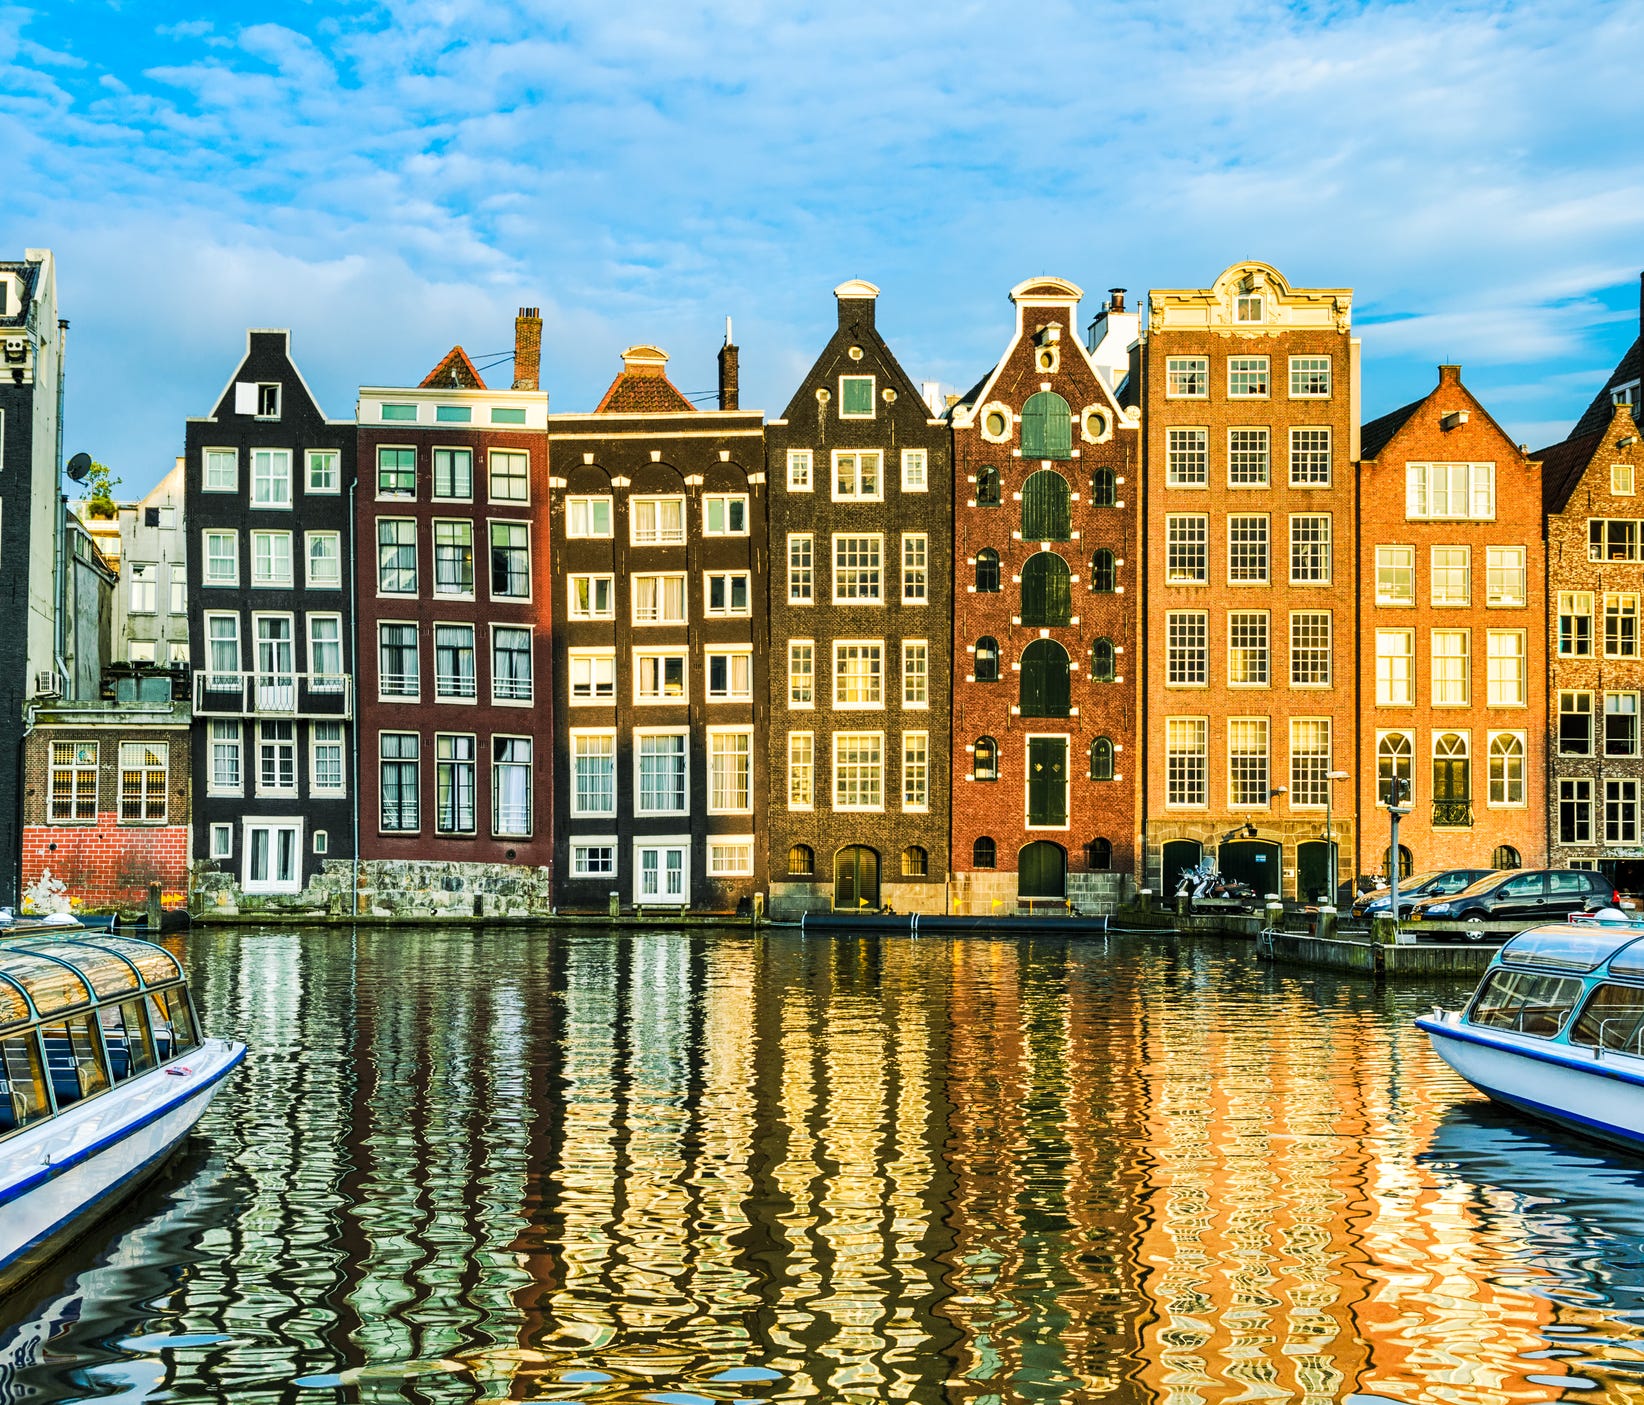 No. 1: The Netherlands.